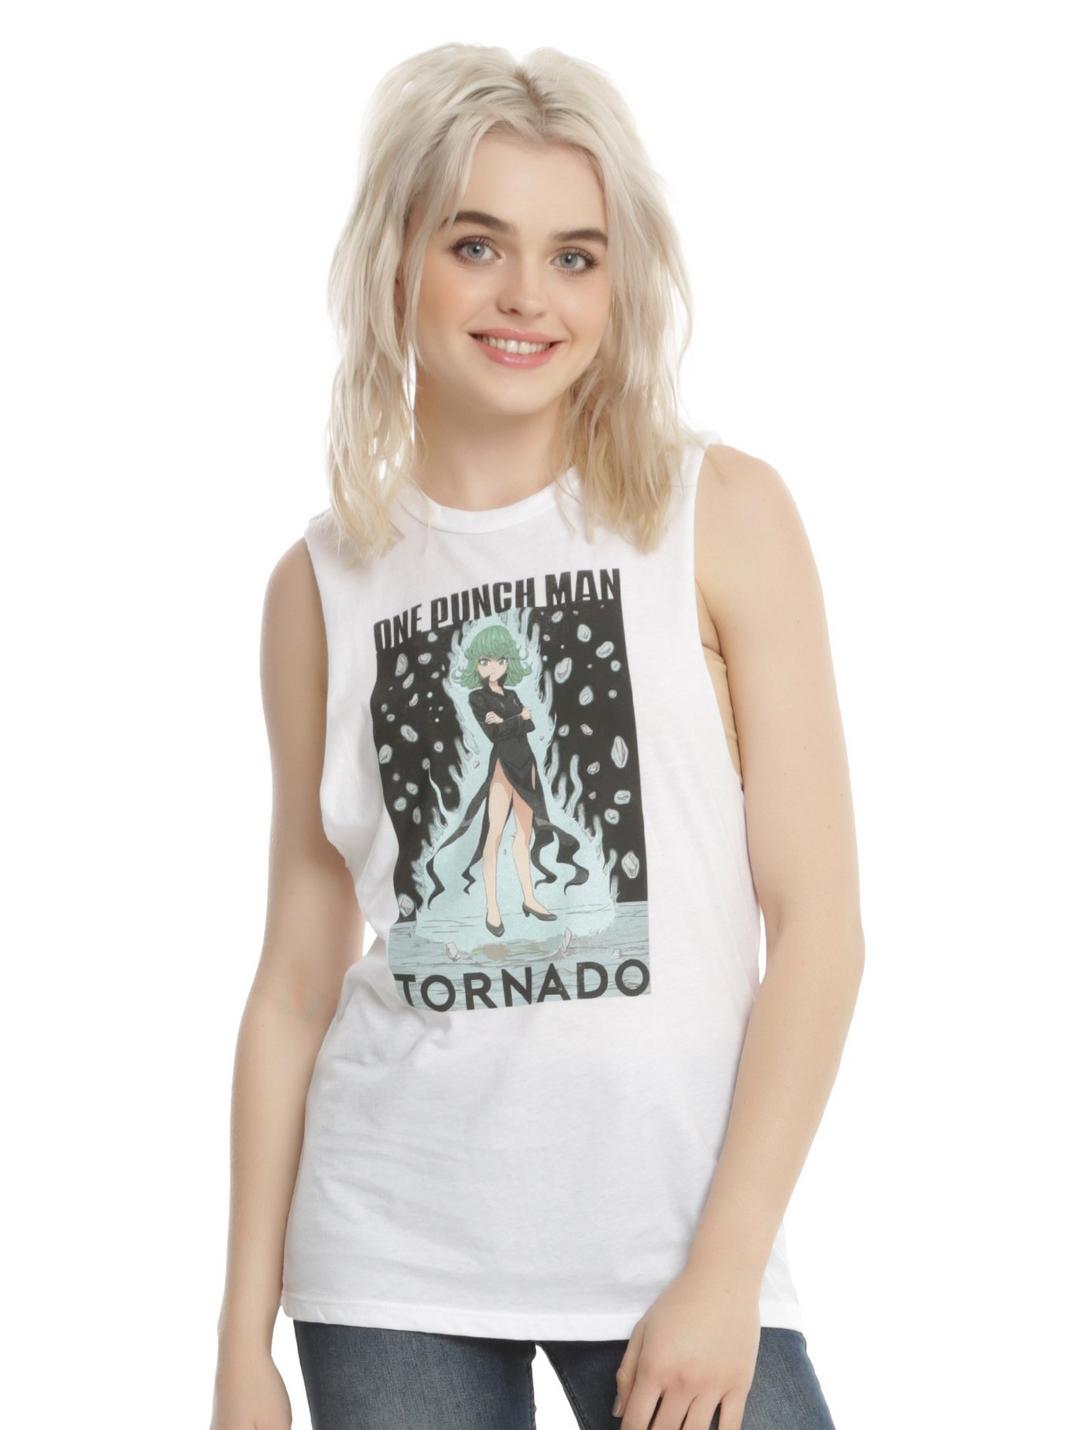 One Punch Man Tornado Girls Muscle Top, WHITE, hi-res